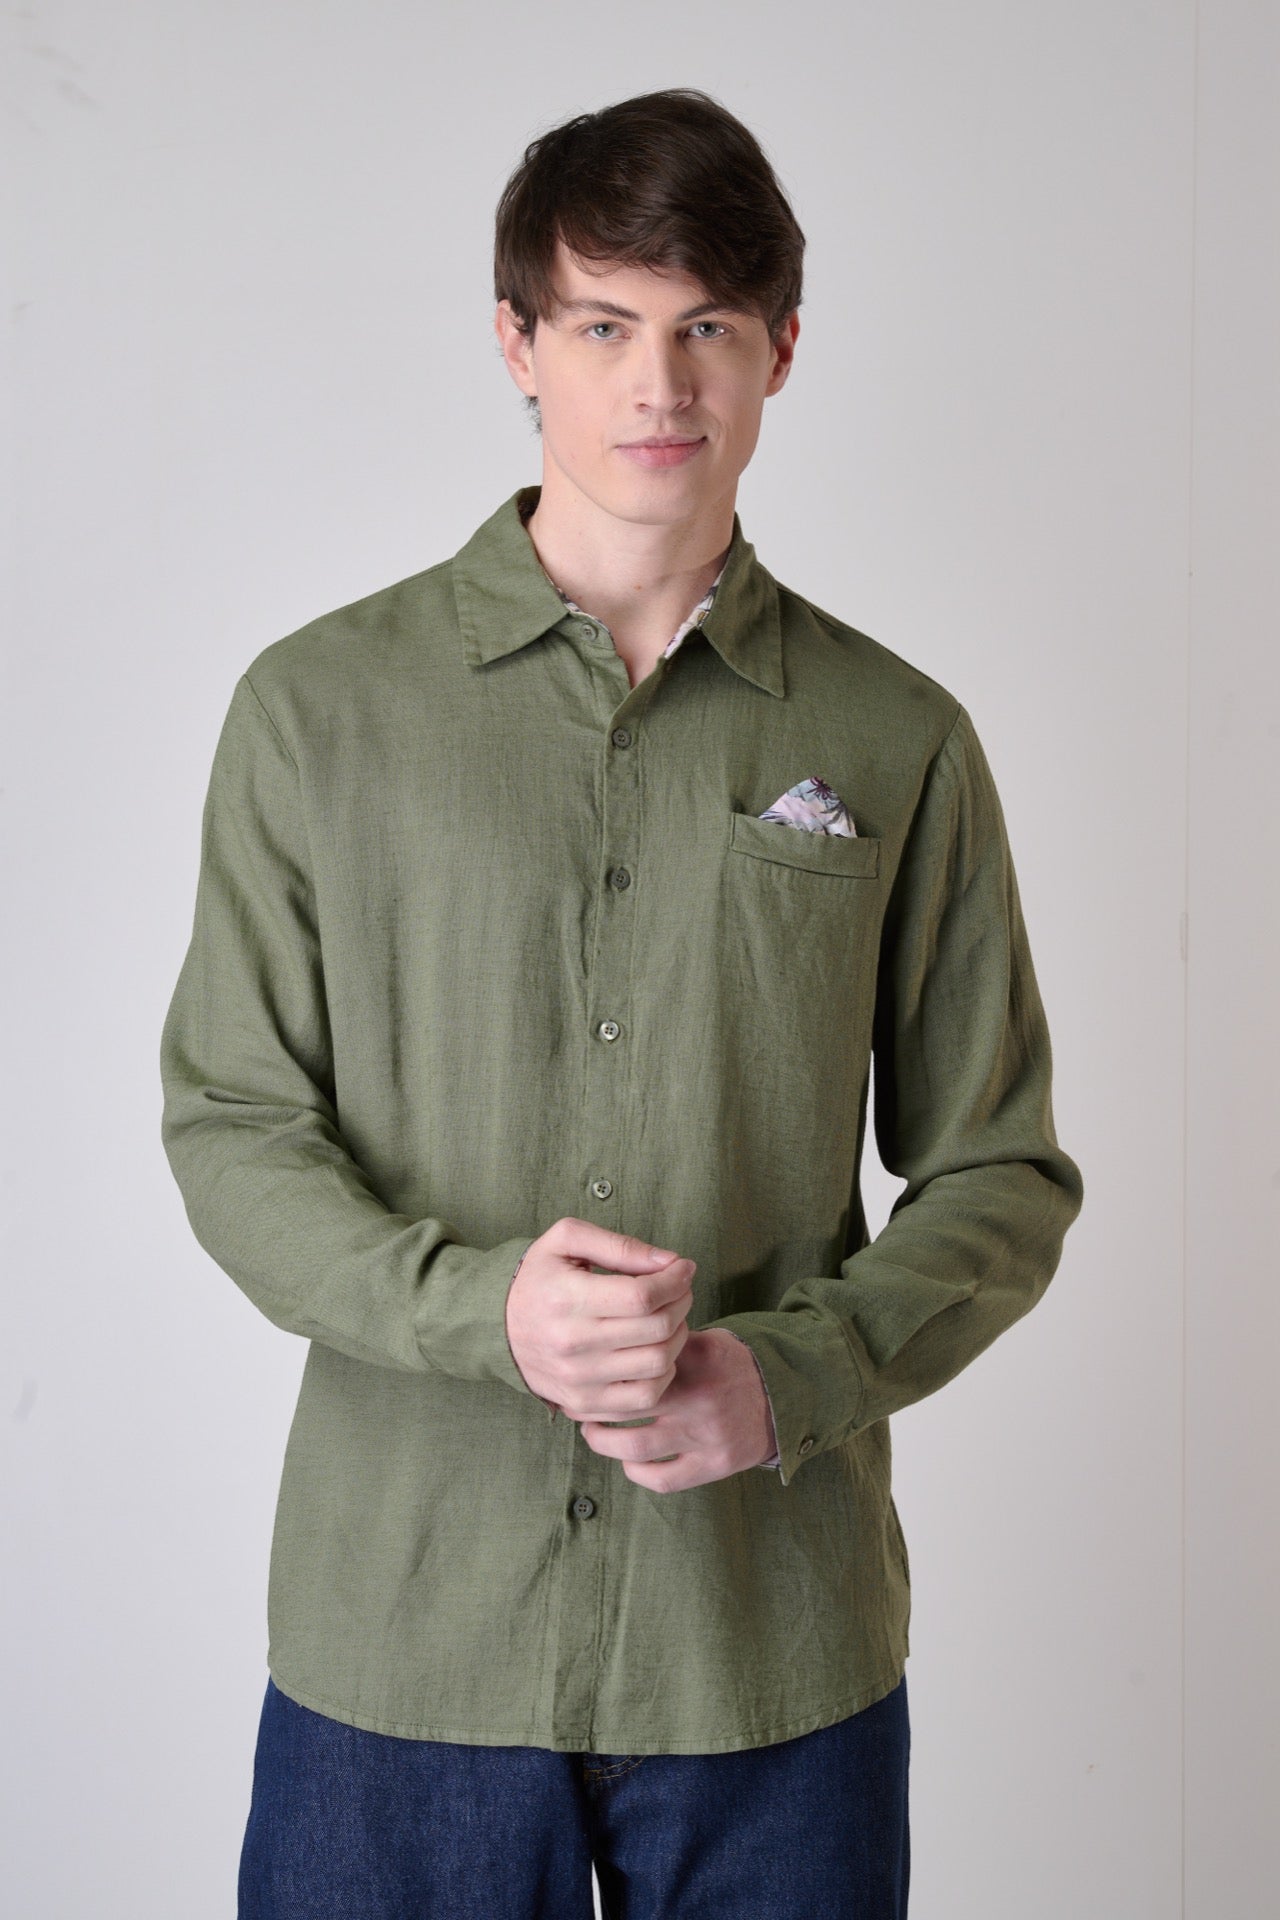 Tailored shirt in military green linen with pocket square, interior and cuffs in V2 fabric